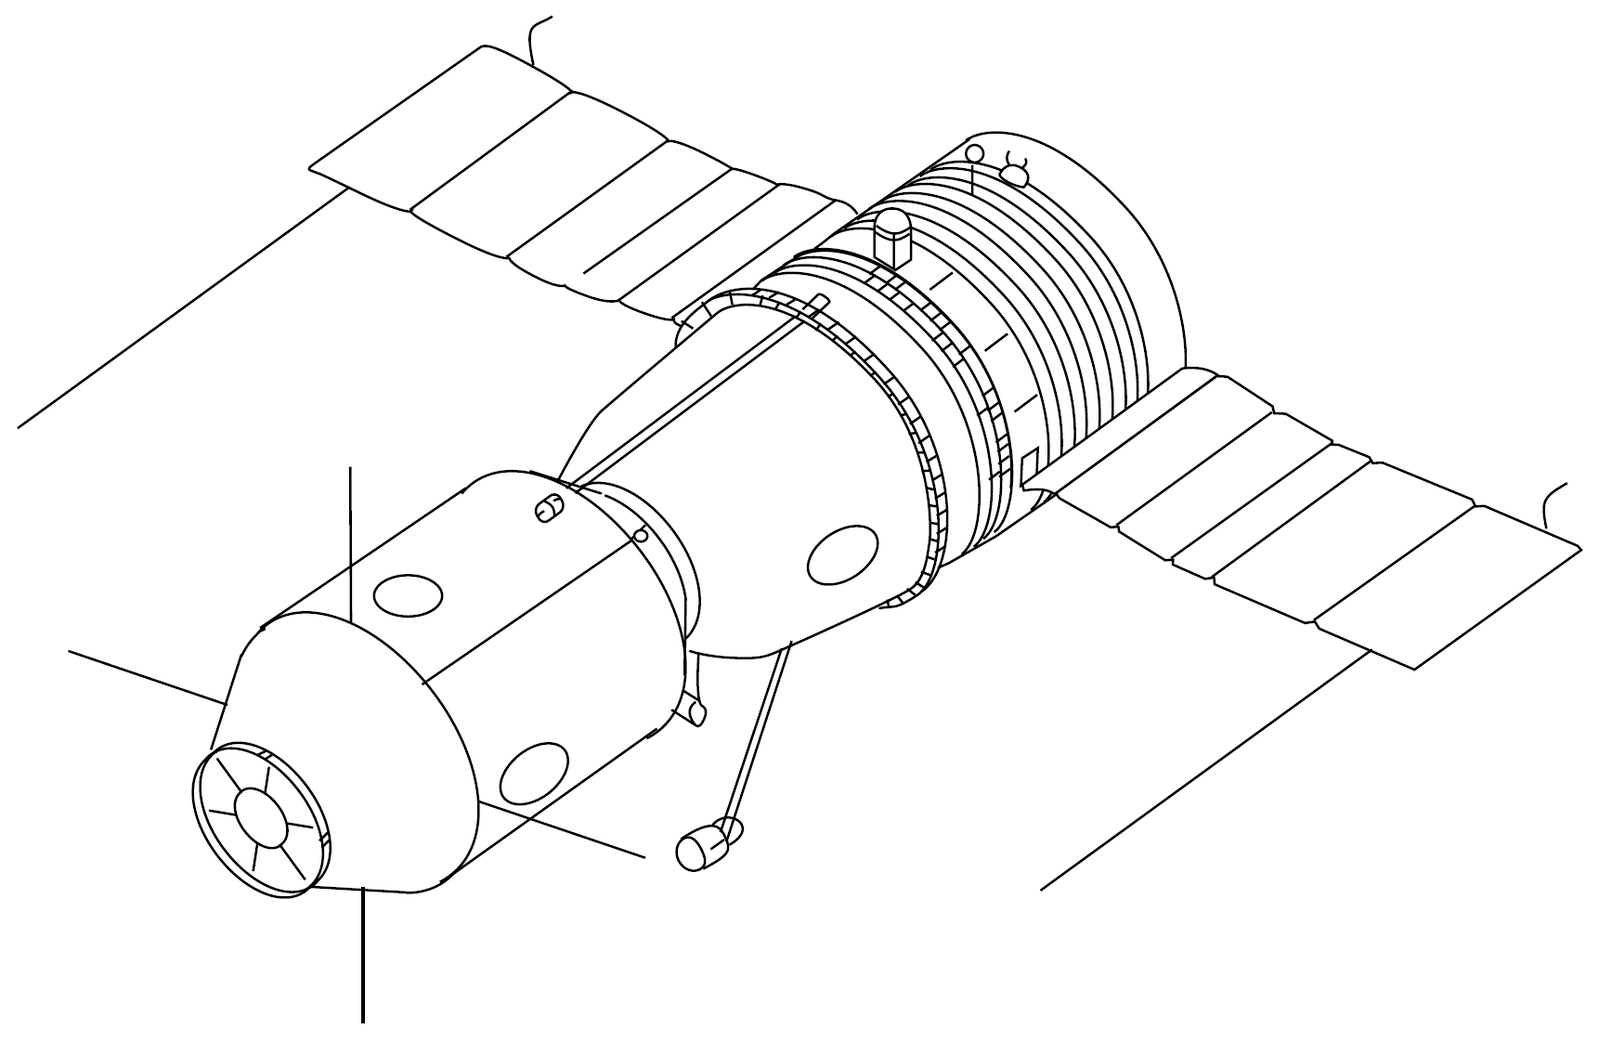 A drawing of a Soyuz spacecraft from the early days of the project